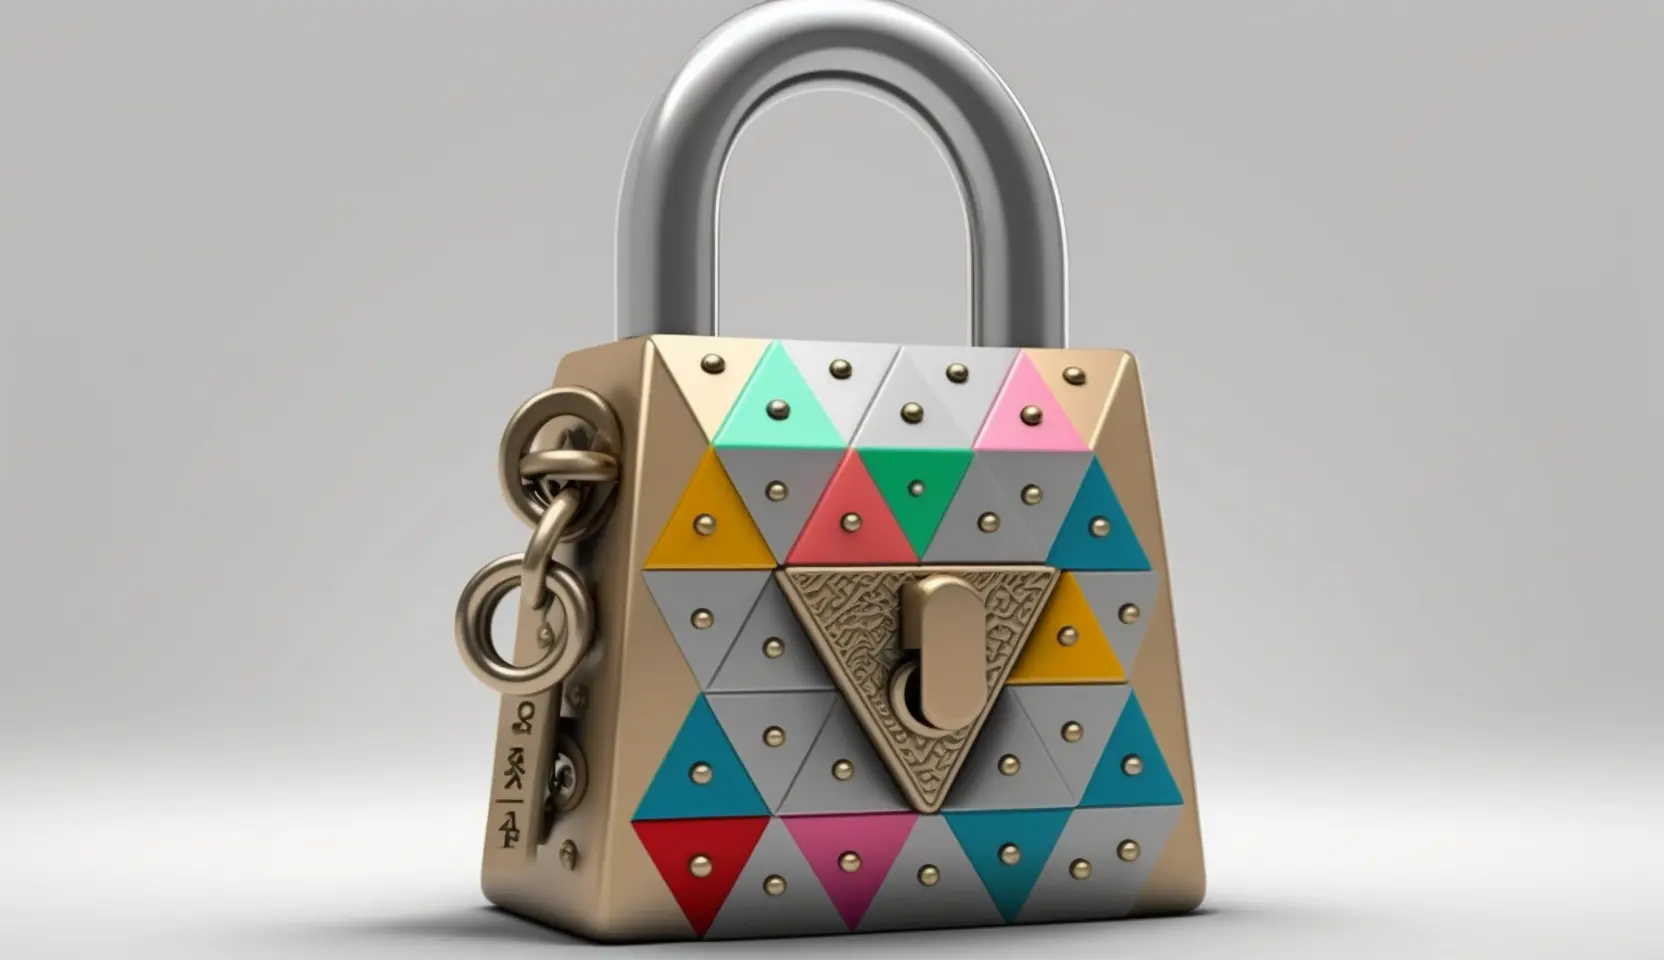 Padlock constructed from triangles as imagined by Midjourney